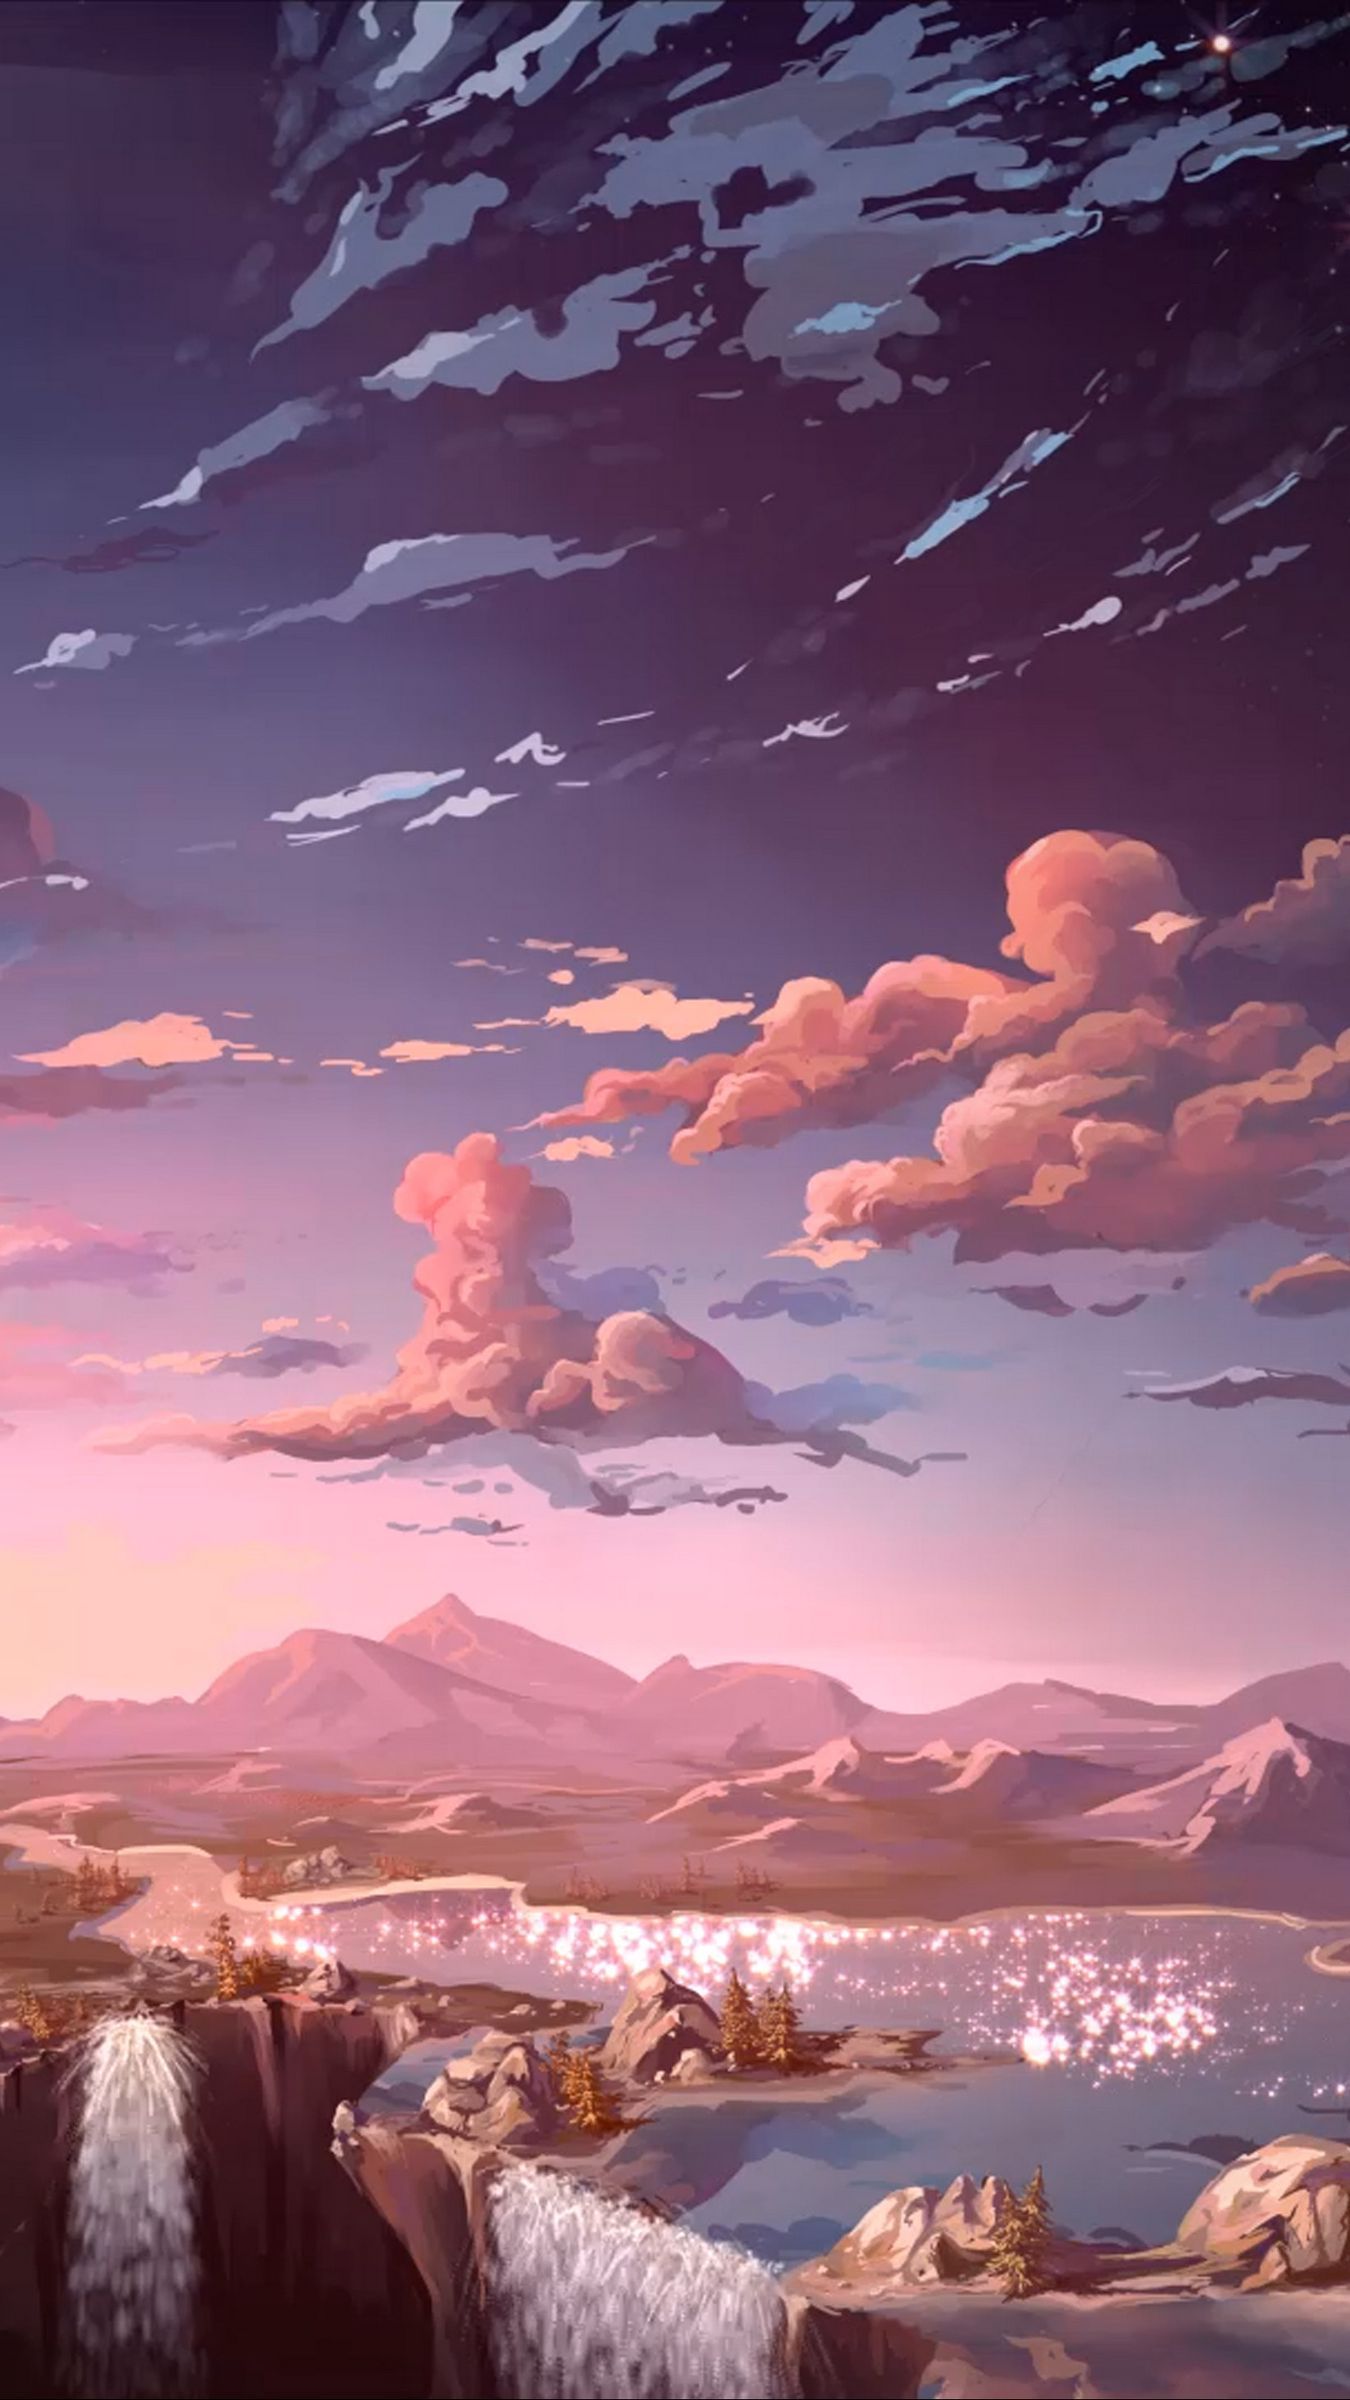 Anime scenery phone wallpaper with a sunset over a cliff - 2000s